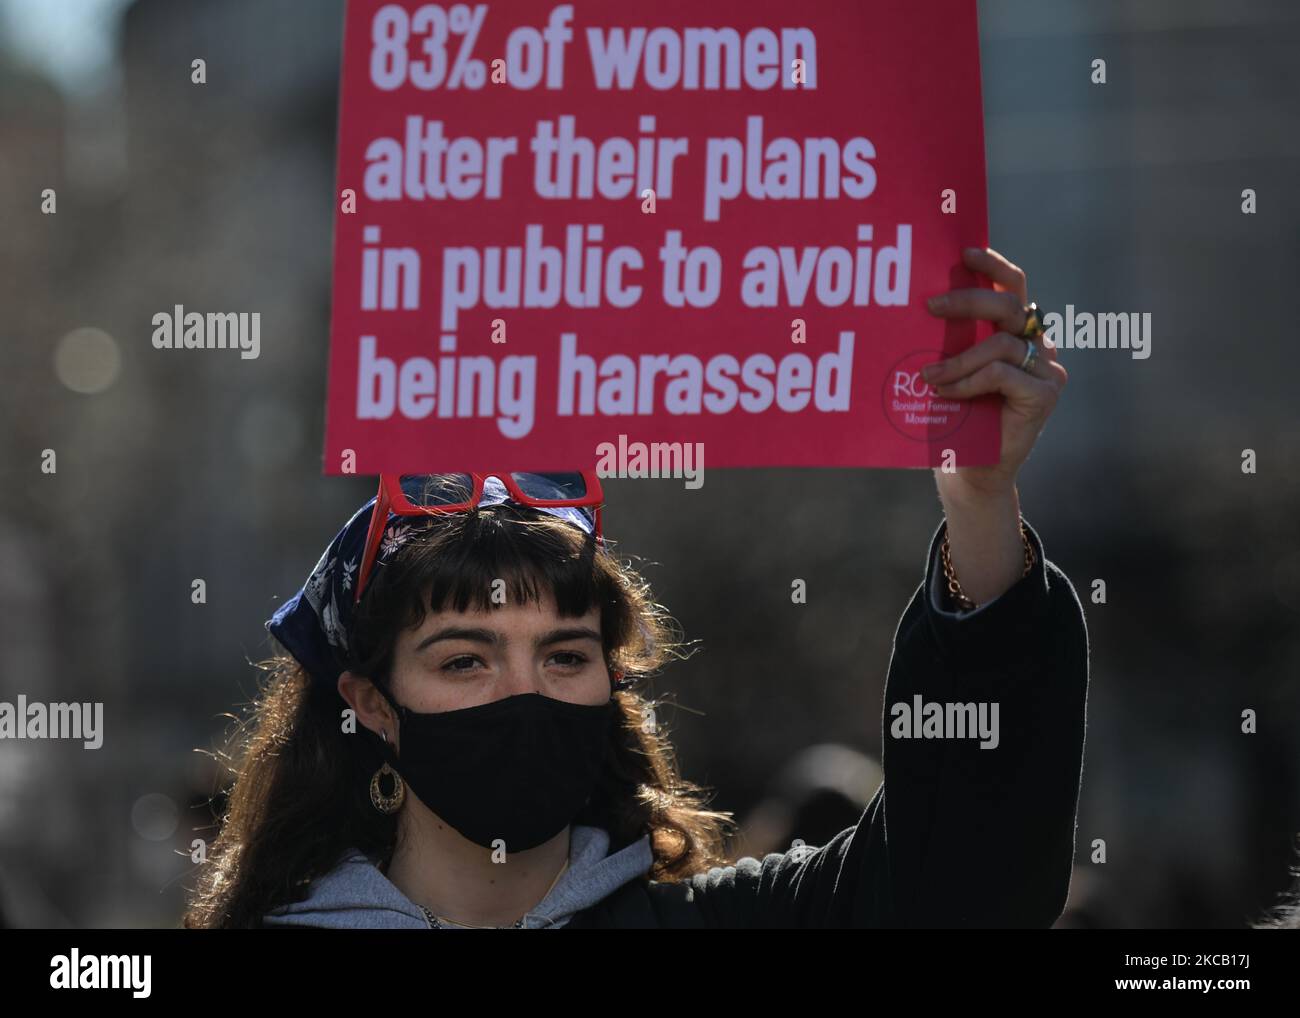 An activist holds a placard reading '83% of women alter their plans in public to avoid being harassed' during a solidarity protest with women in the UK against gender-based violence seen on O'Connell Street in Dublin. The tragic killing of 33-year-old Sarah Everard in London sparked outrage among women in Britain, Ireland and across the world. Activists demand further action to combat violence against women. On Tuesday, 16 March 2021, in Dublin, Ireland. (Photo by Artur Widak/NurPhoto) Stock Photo